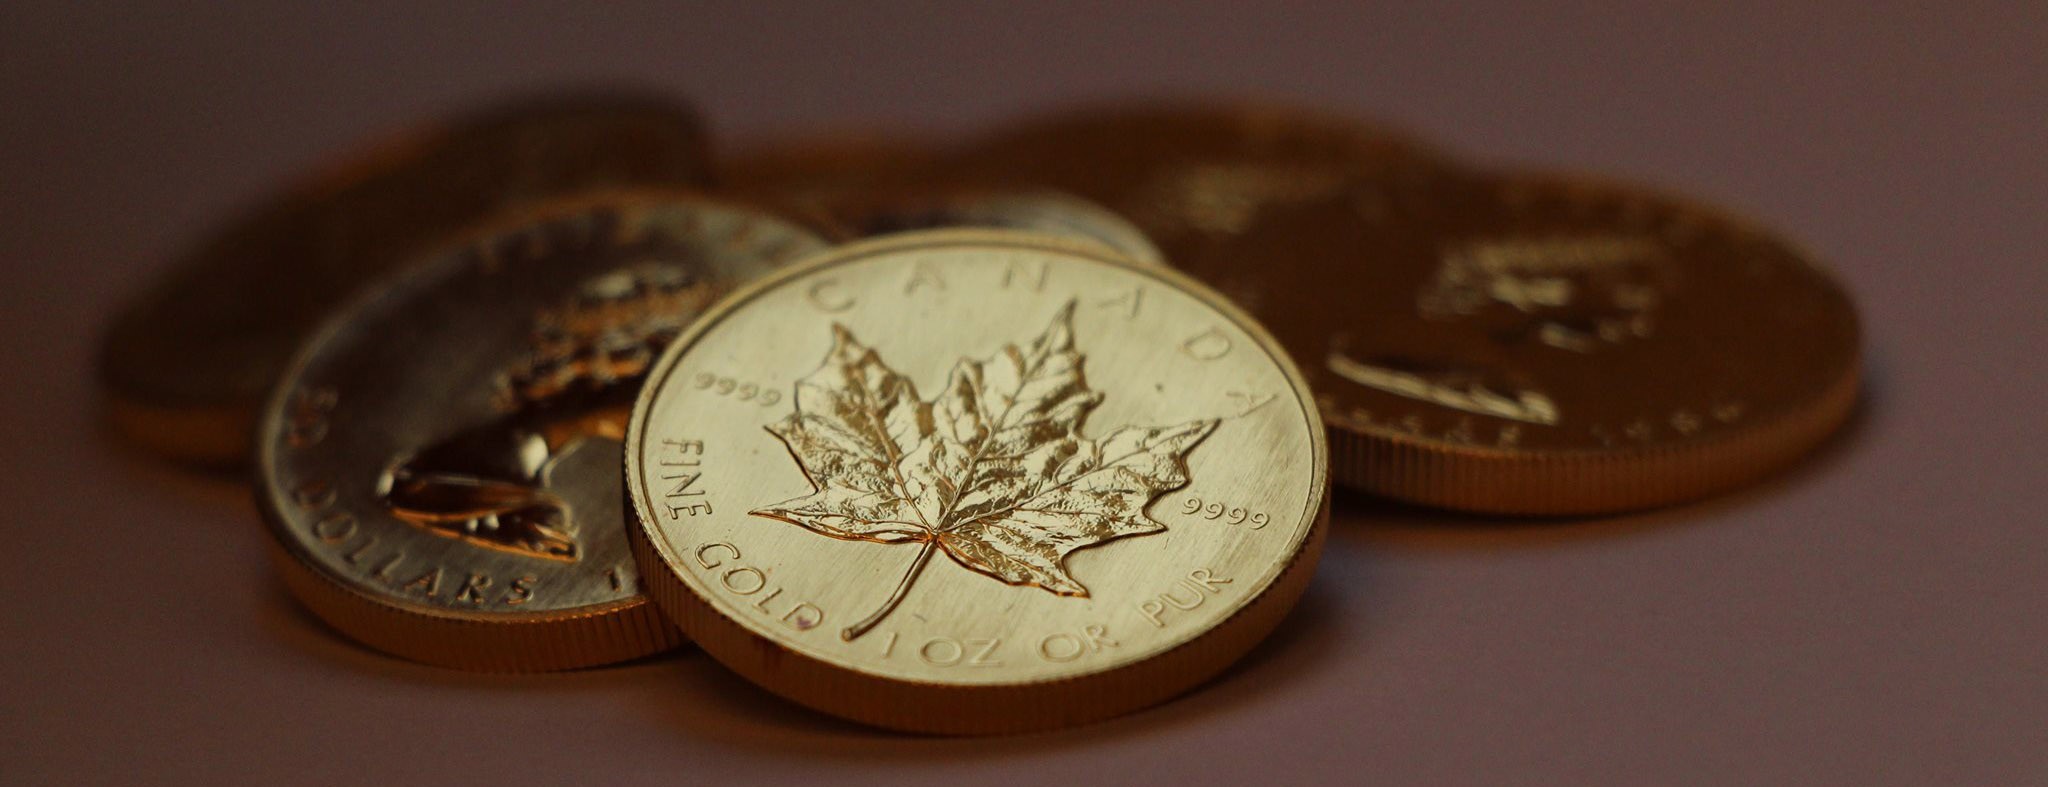 gold coins maple leaf